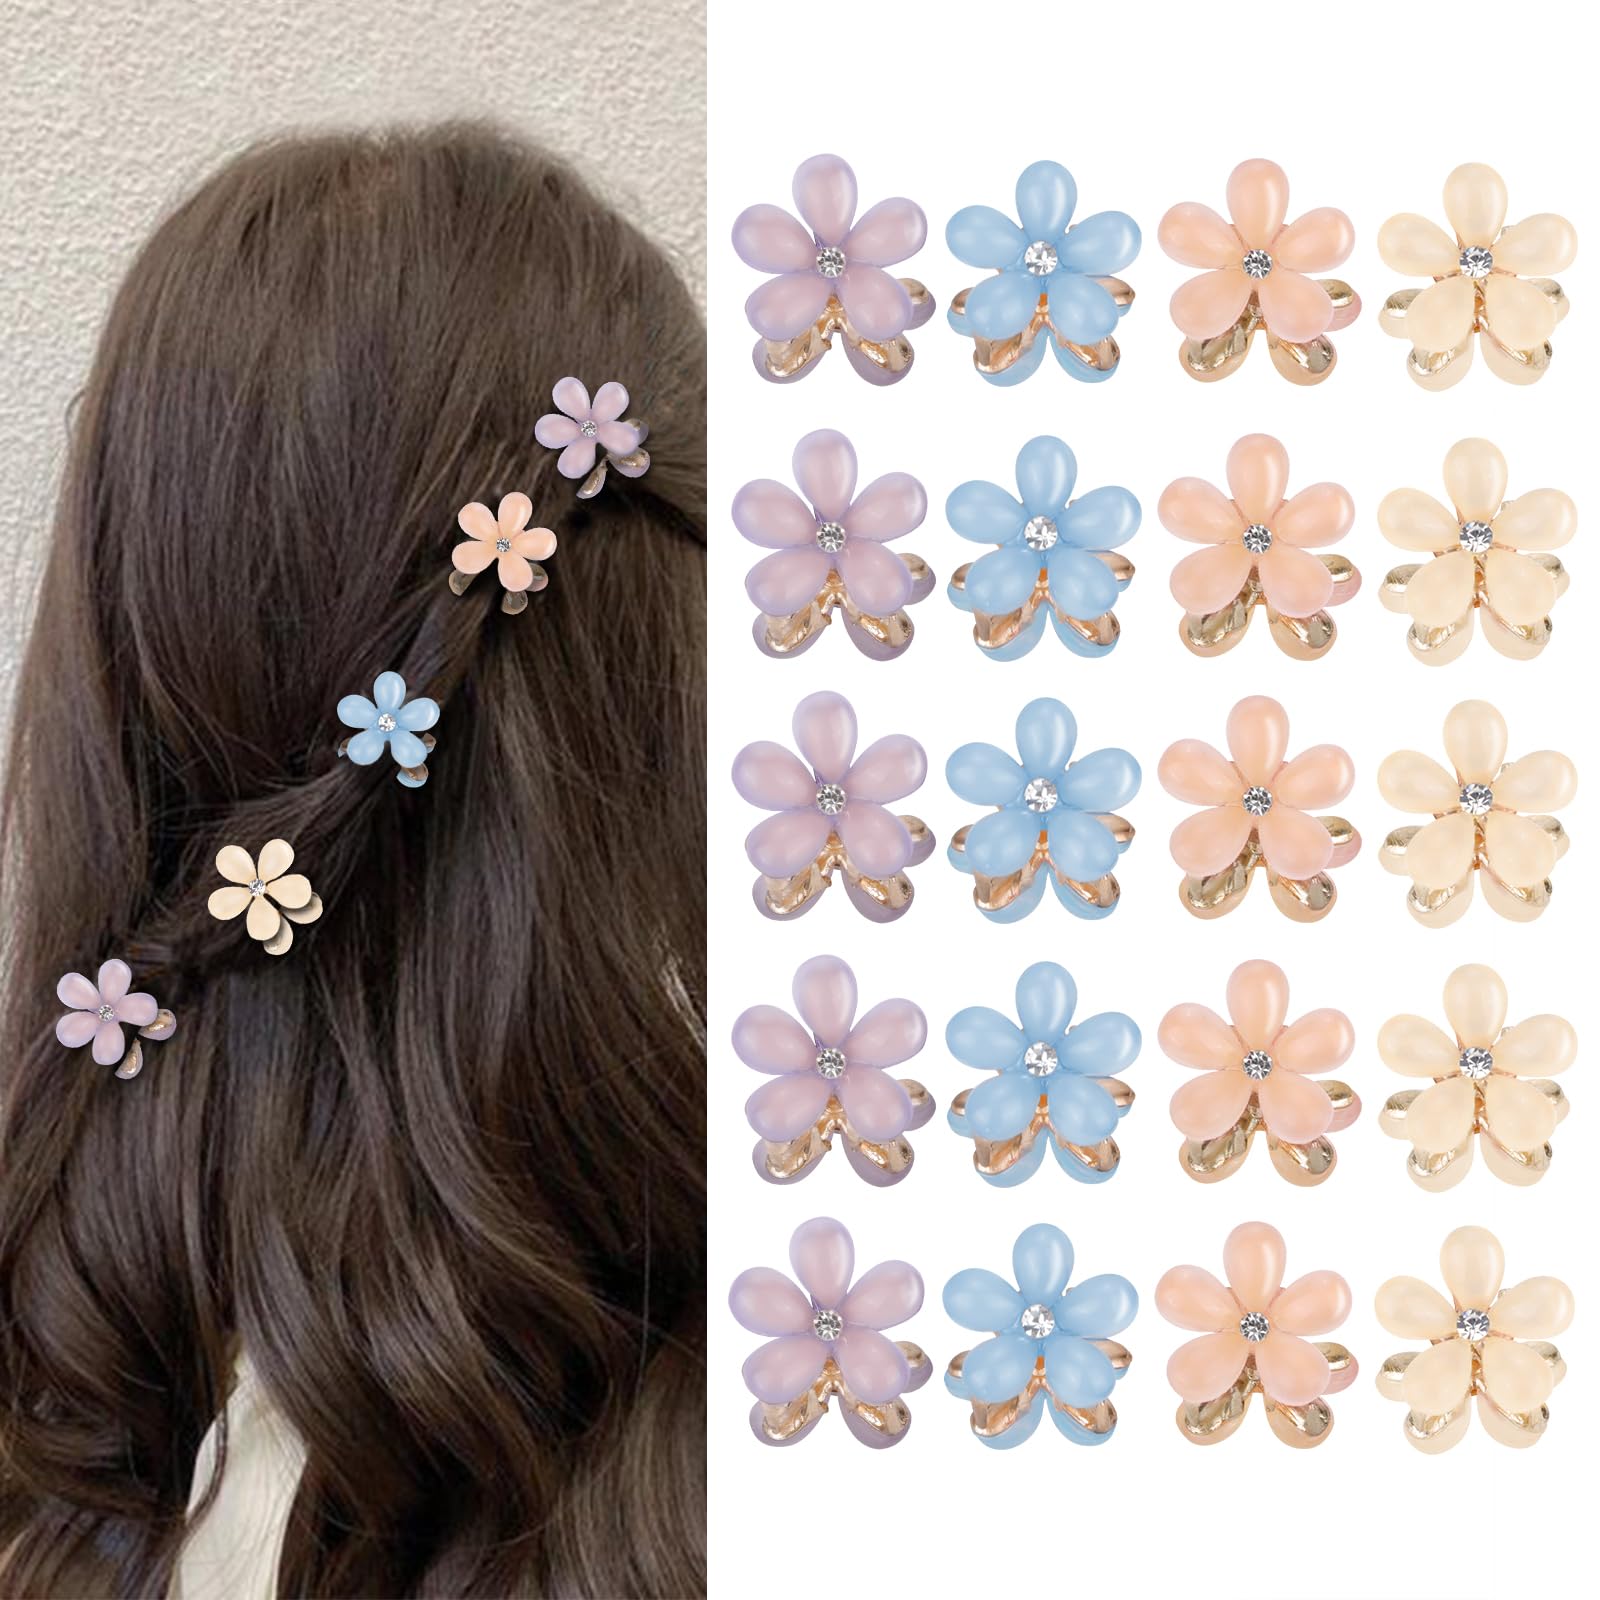 Butterfly Clips hairstyle | Butterfly hairstyle, Clip hairstyles, Short  hair styles